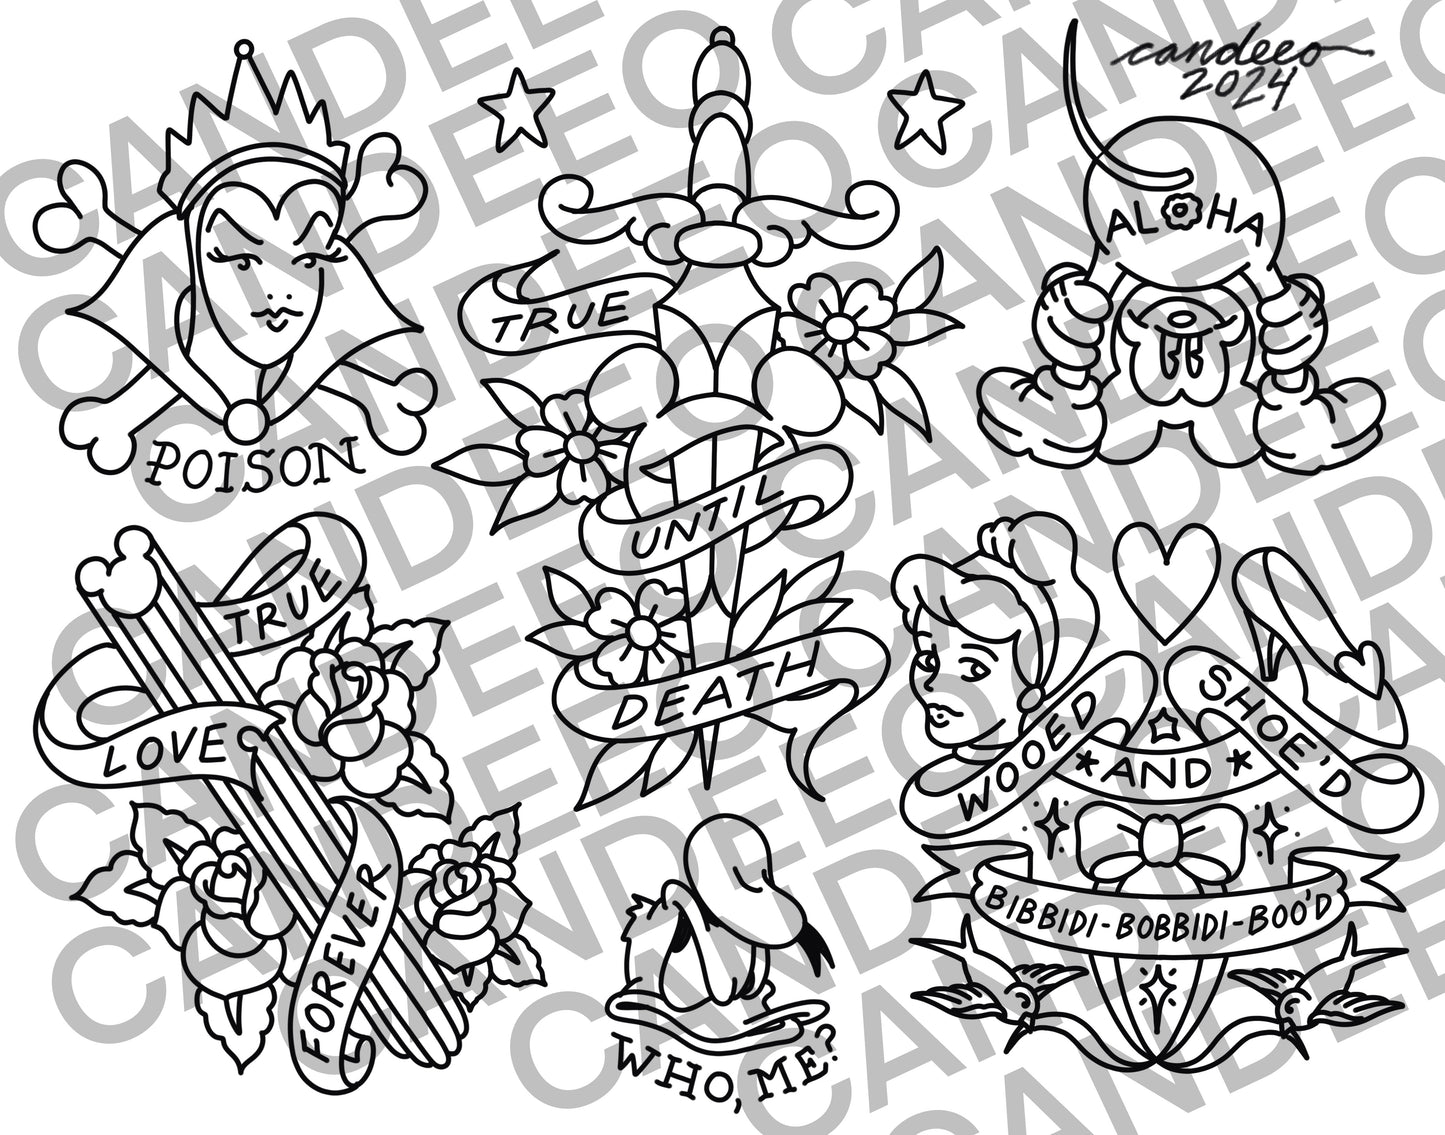 Magical World of Tattooing - Digital Tattoo Flash with Linework